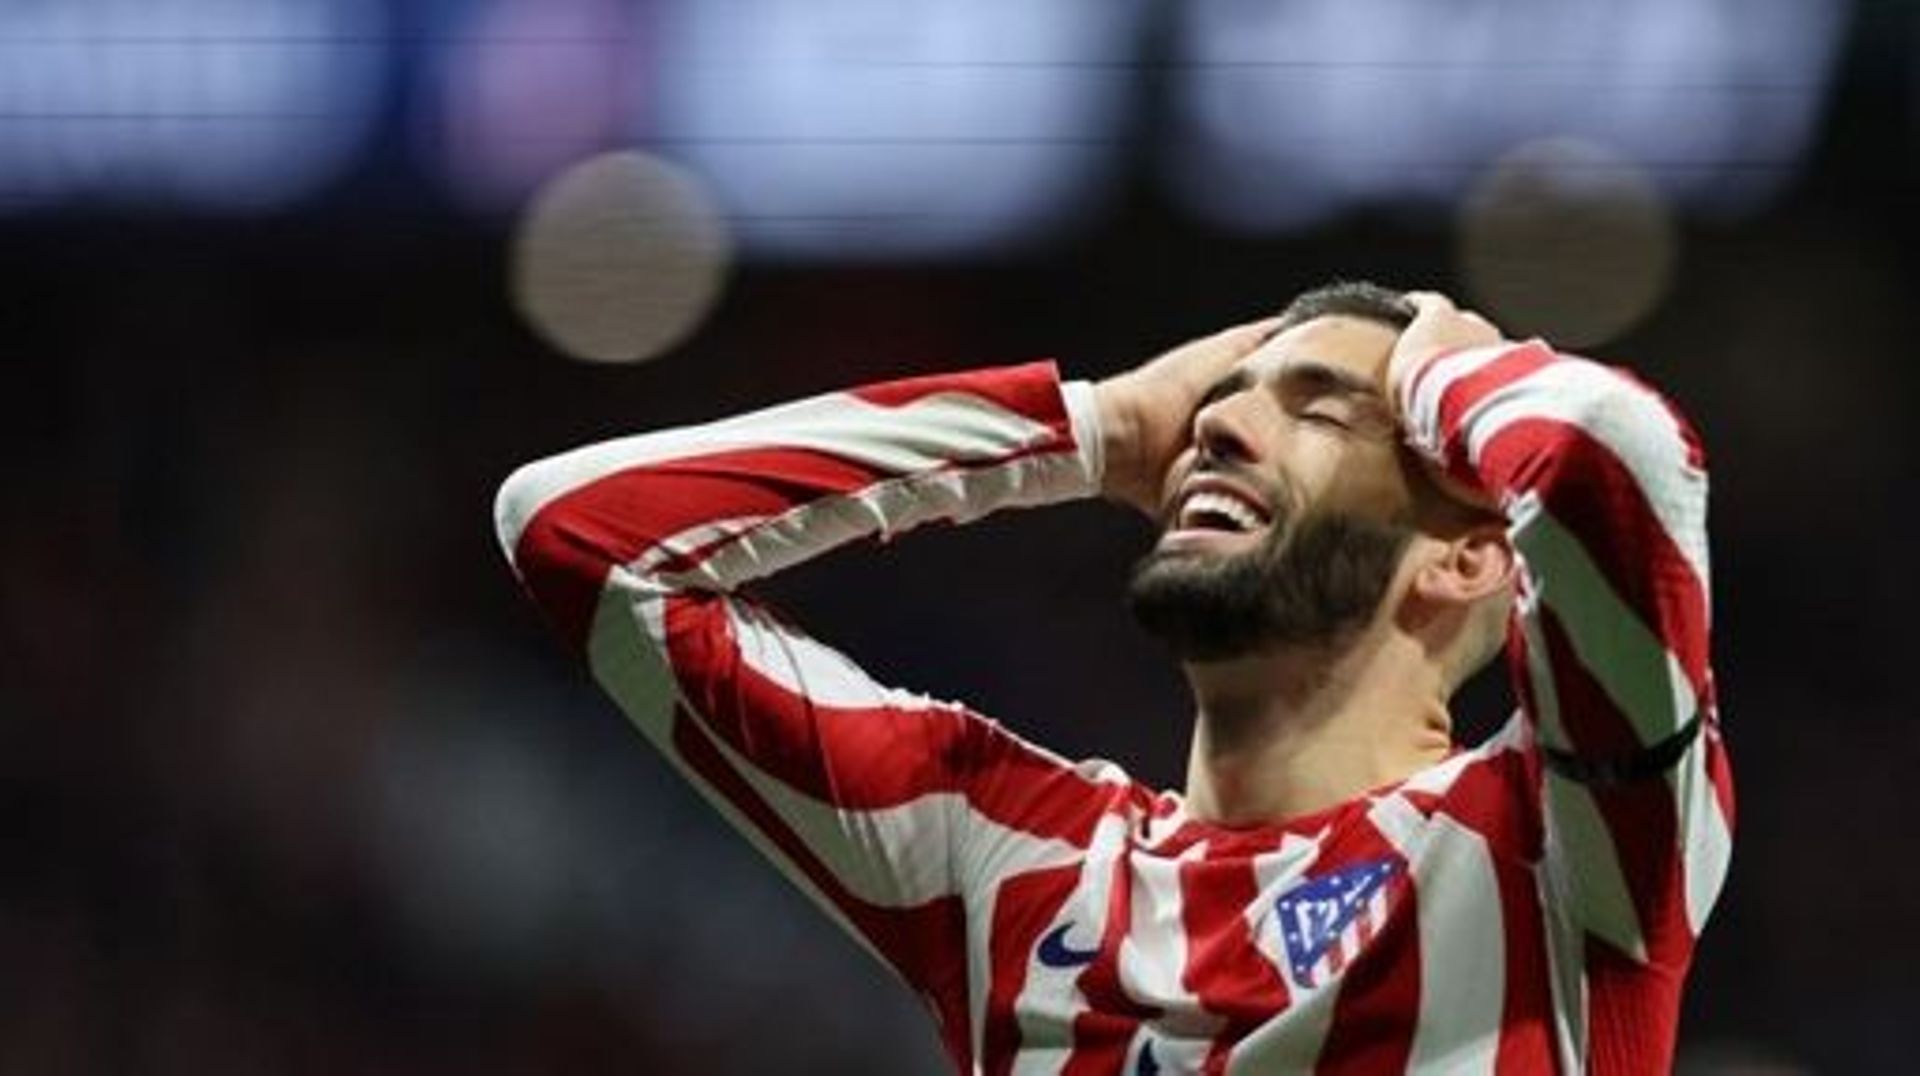 Atletico Madrid’s Belgian midfielder Yannick Ferreira-Carrasco reacts to a missed chance during the Spanish League football match between Club Atletico de Madrid and Elche CF at the Wanda Metropolitano stadium in Madrid on December 29, 2022. Pierre-Phili